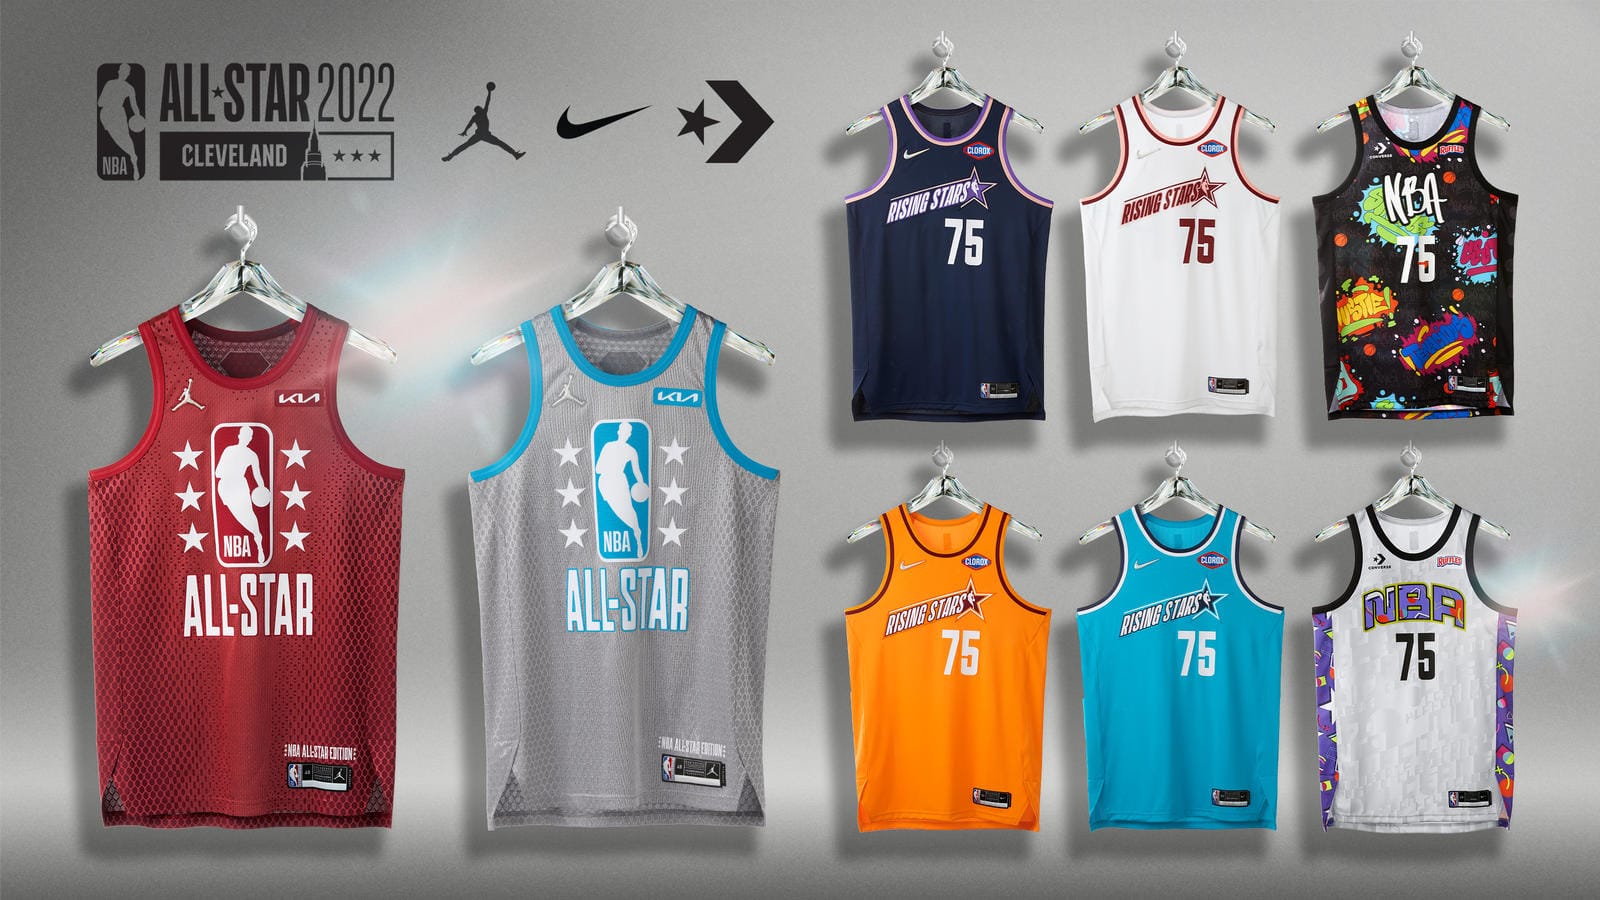 Celebrate the nba’s 75th anniversary season and the city of cleveland with nike’s nba all-star 2022 uniforms